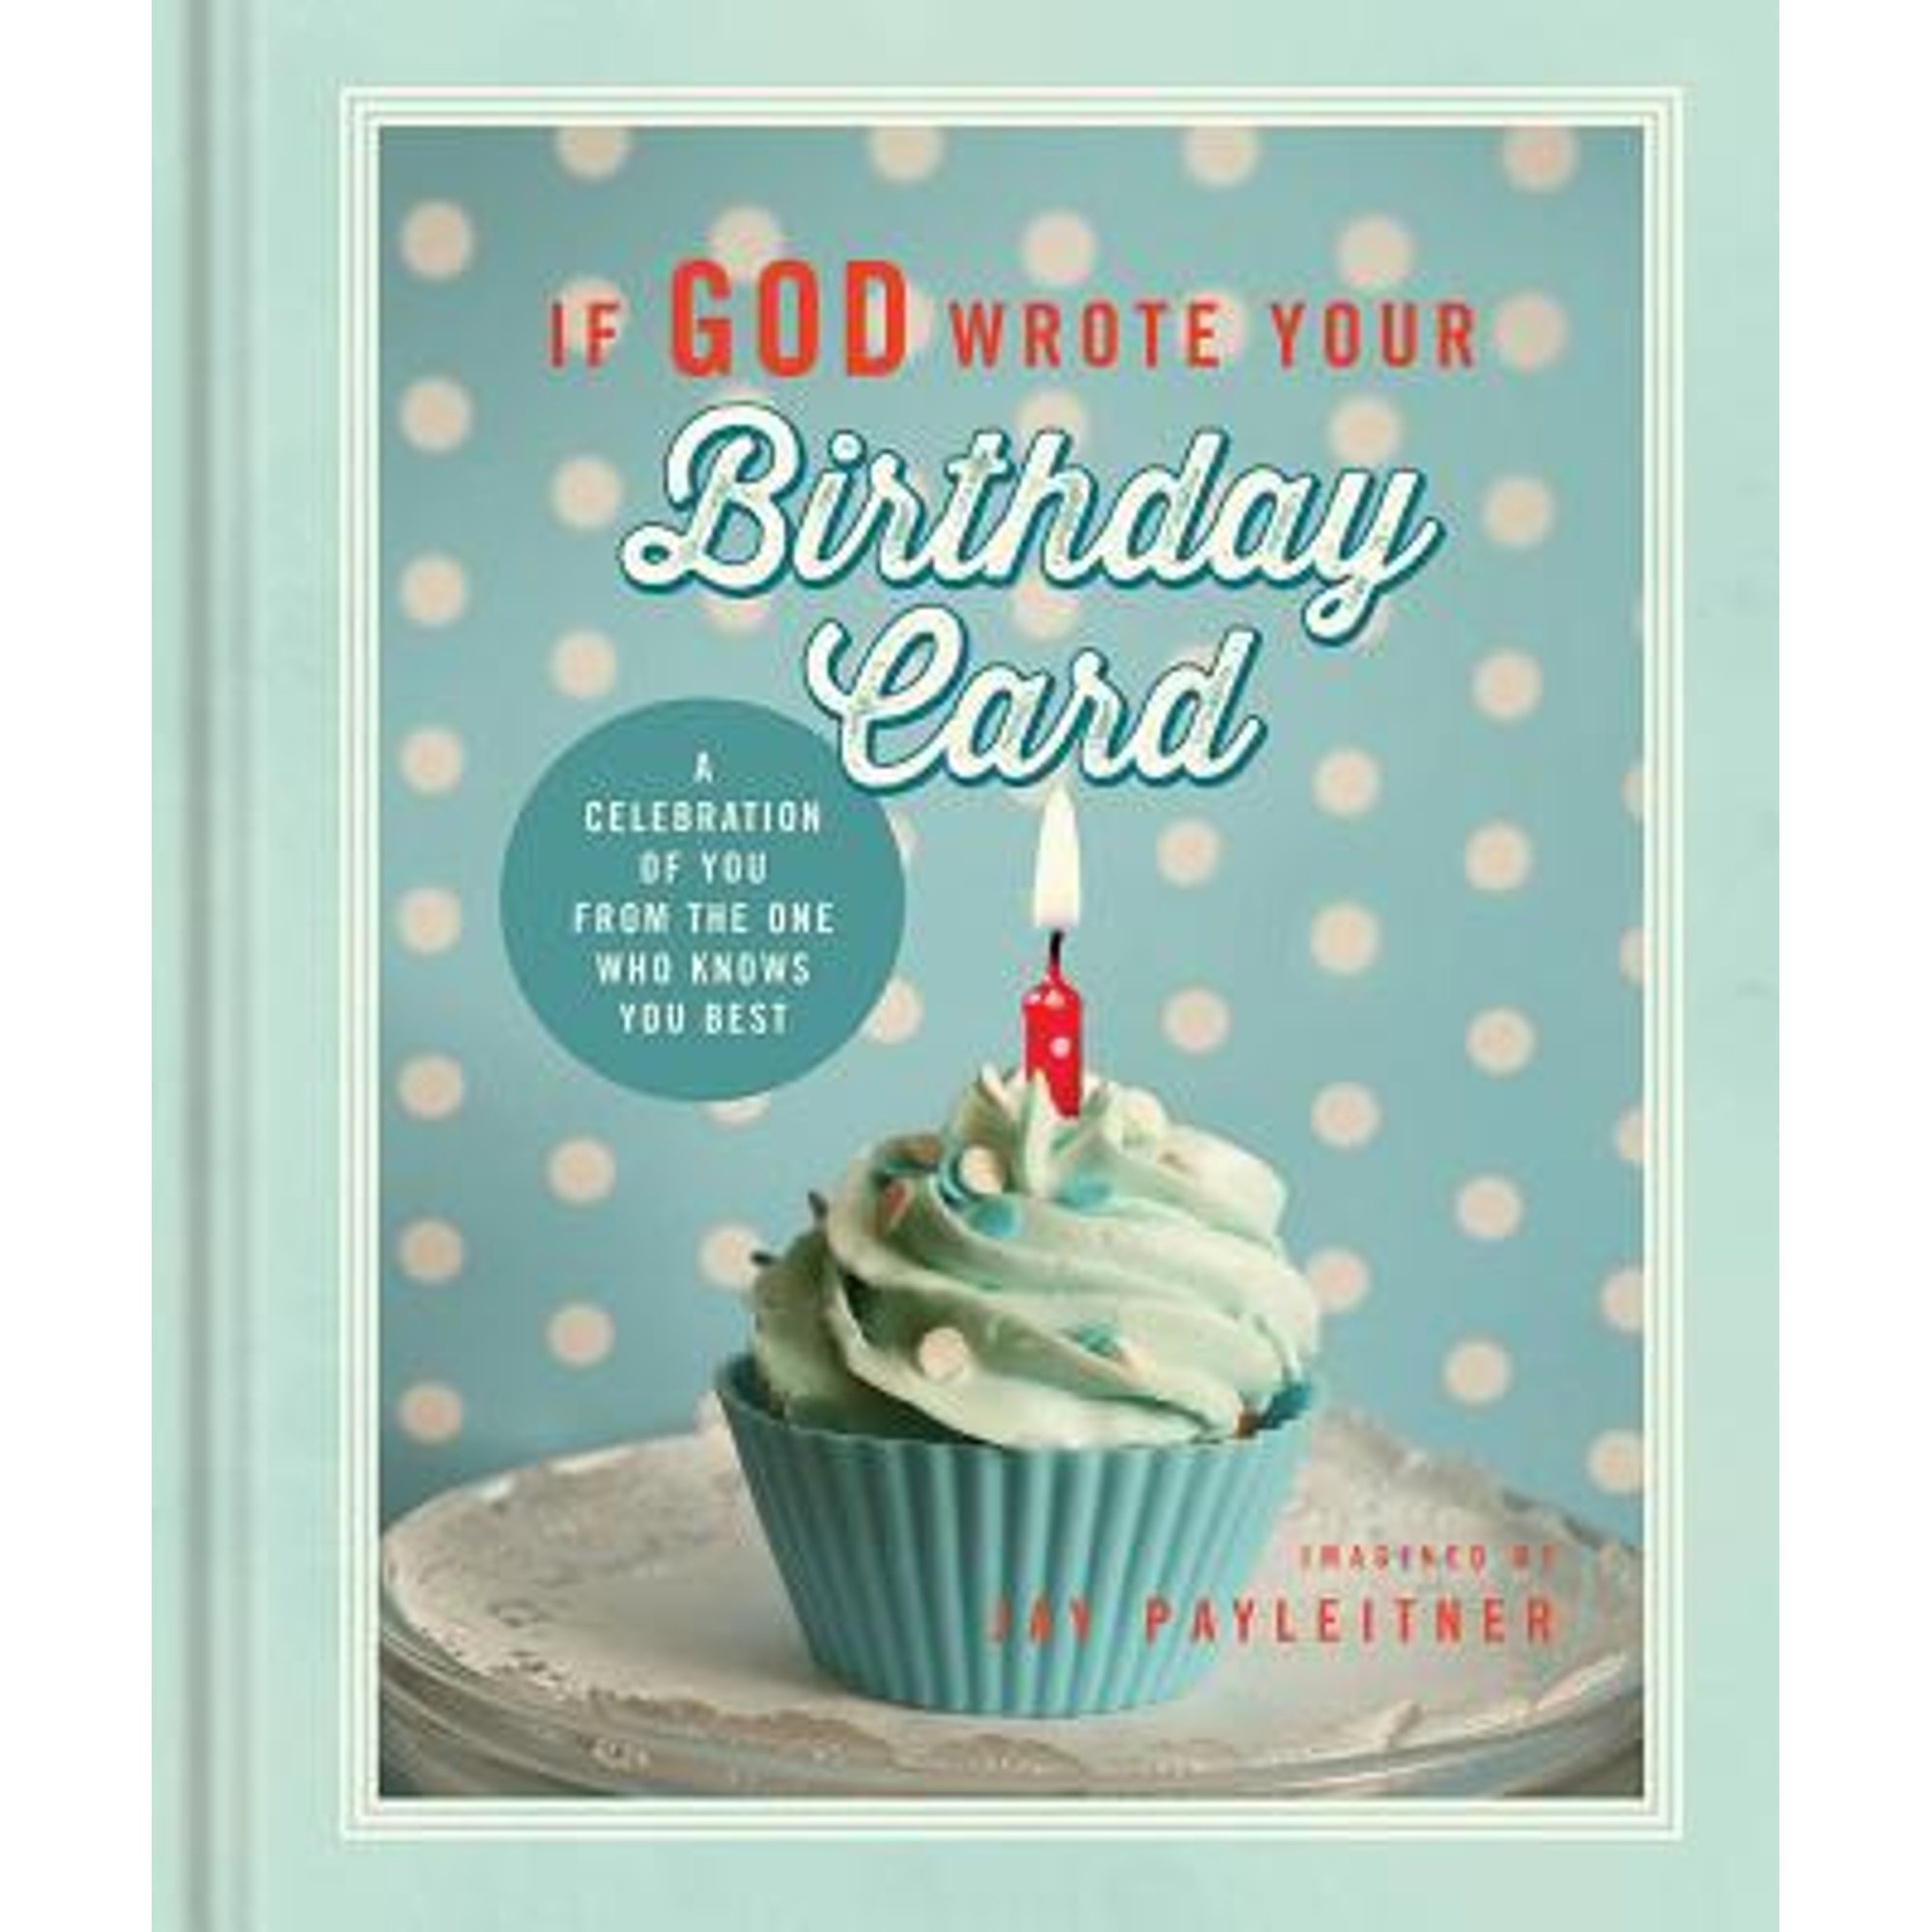 If God Wrote Your Birthday Card: A Celebration of You from the One Who Knows You Best (Hardcover) by Jay Payleitner - image 1 of 1